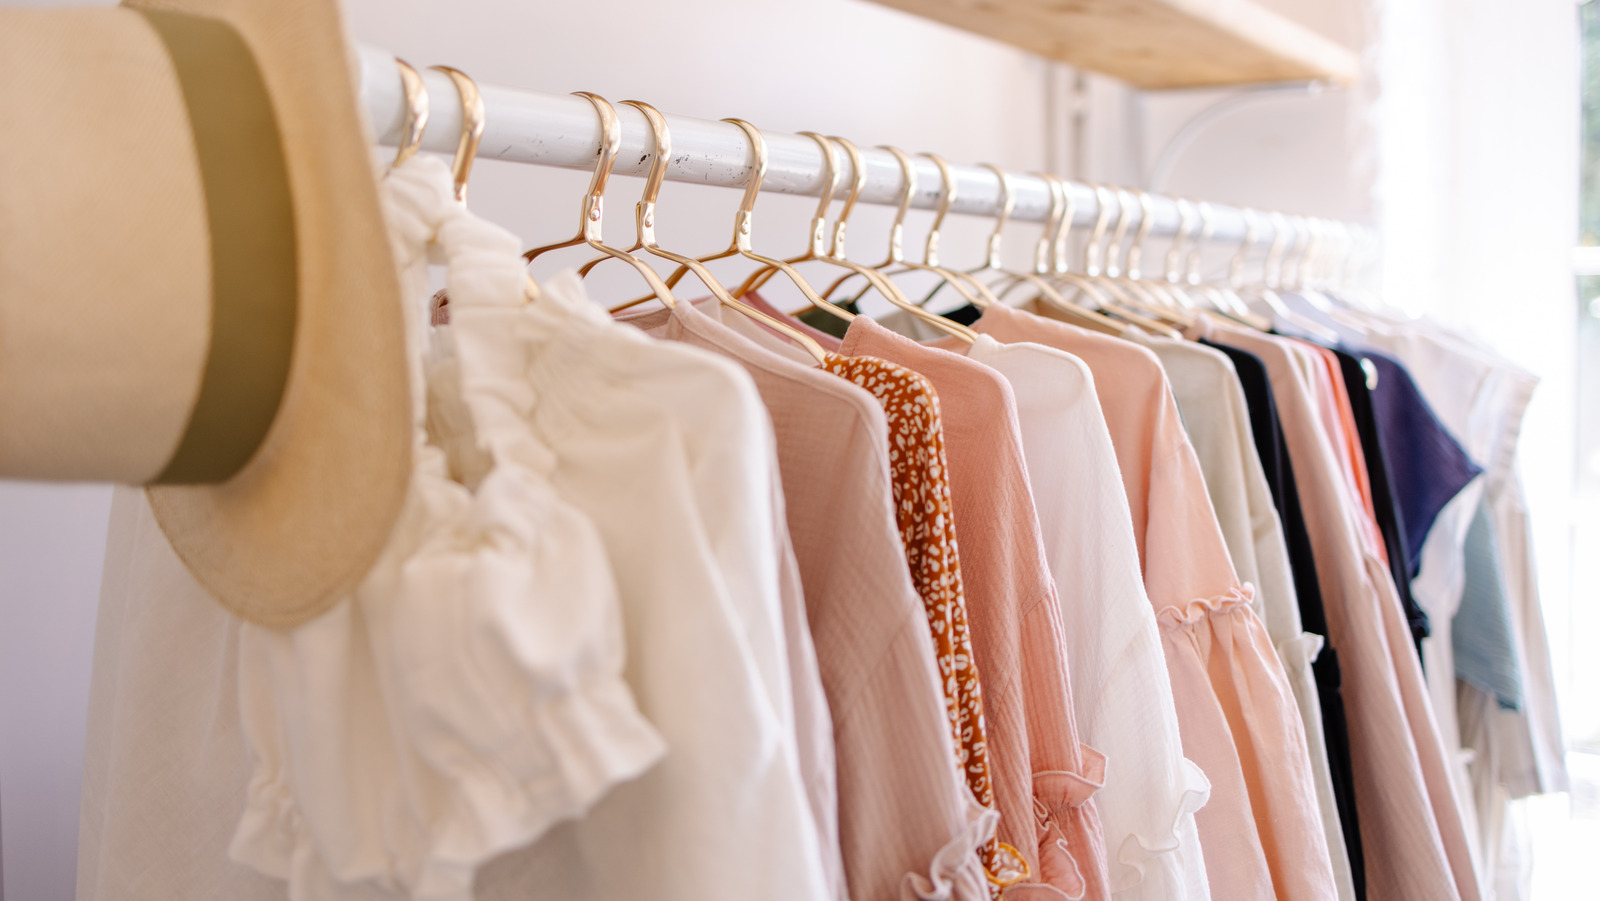 https://www.housedigest.com/img/gallery/the-best-hangers-to-keep-your-closet-perfectly-organized/l-intro-1664899775.jpg